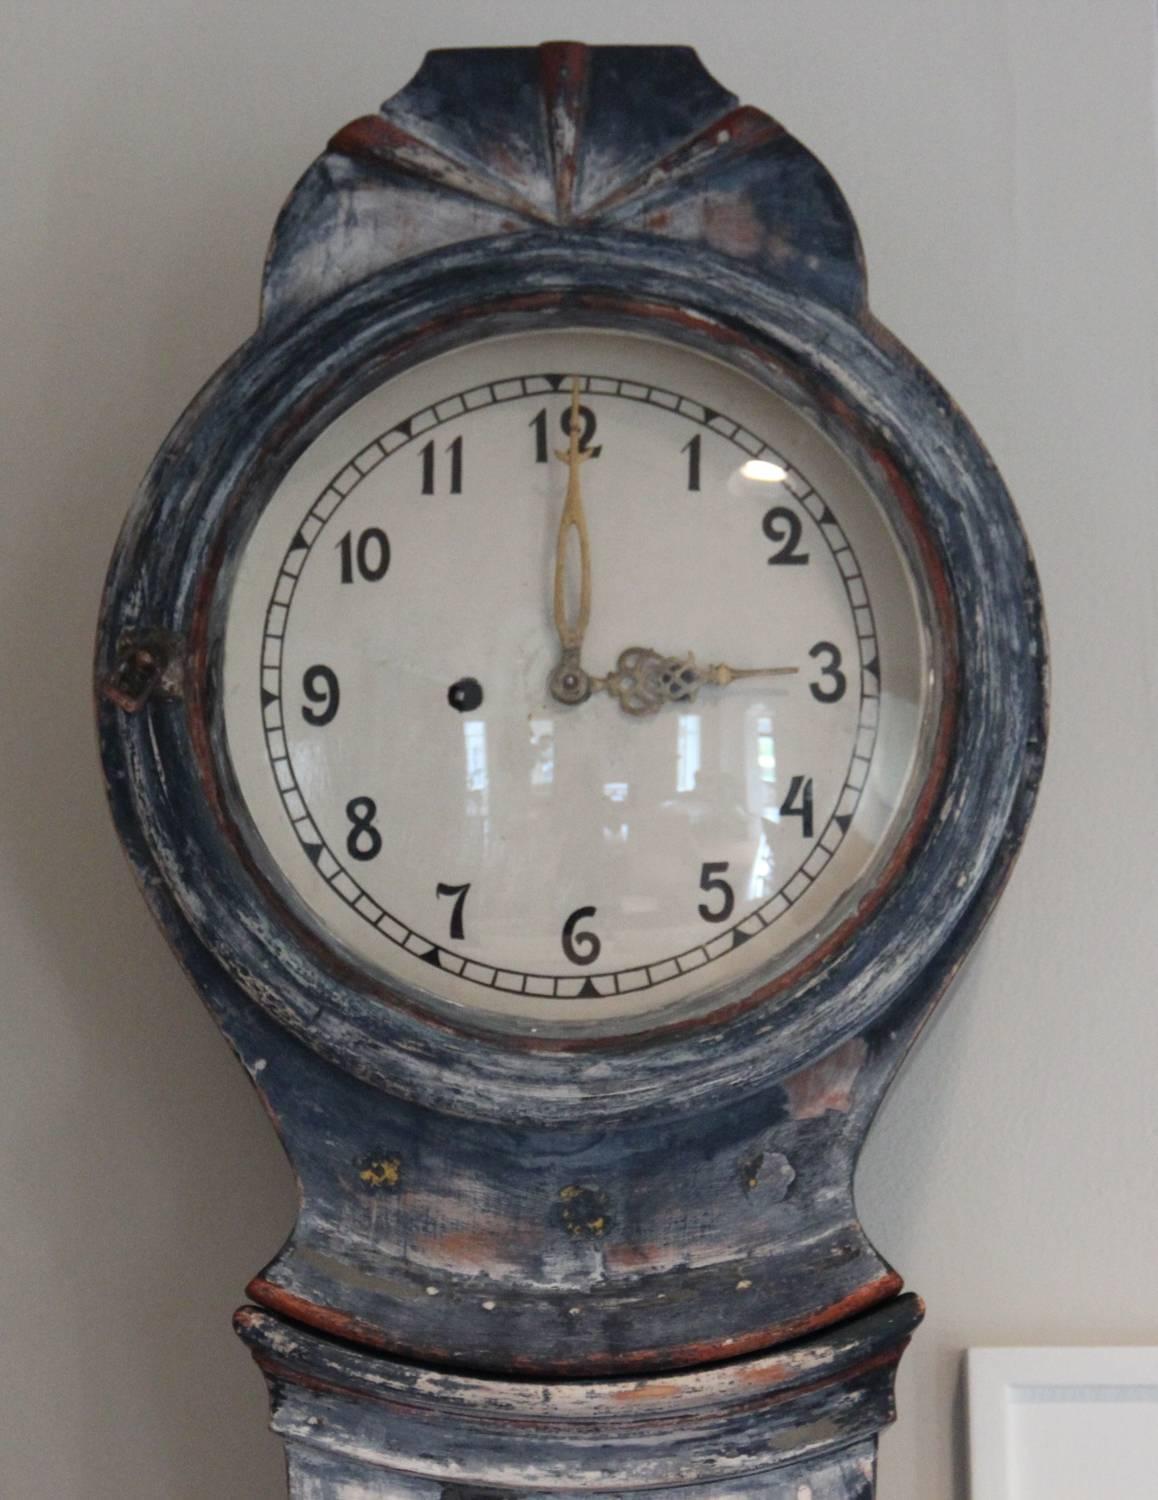 A Swedish tall case clock from the Gustavian period in the Classic Mora form. This charming clock has retained its original blue paint surface and hand-painted floral and leaf motif. Original glass, face, clockworks, pendulum and weights. This clock